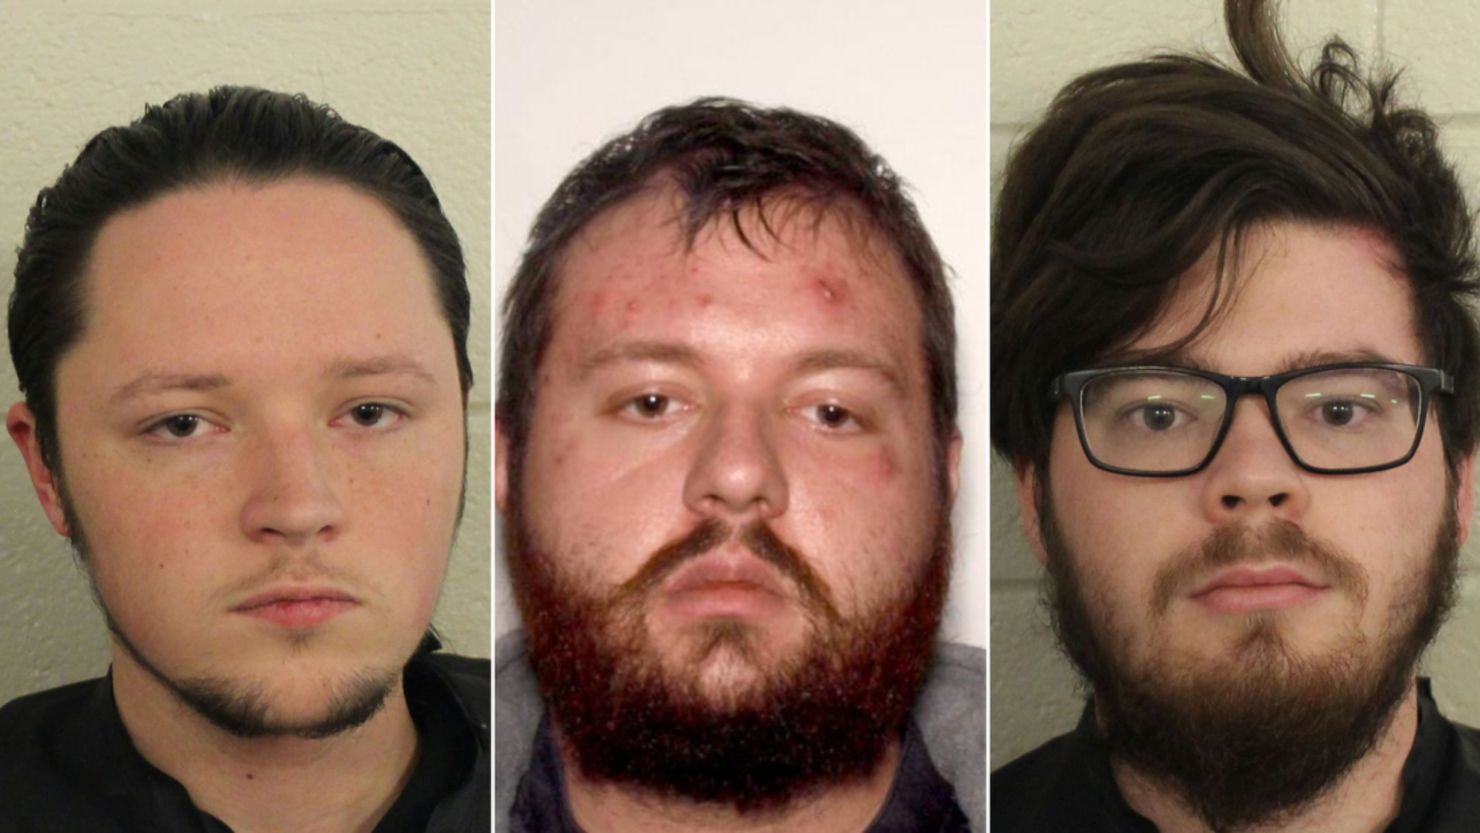 From left: Jacob Oliver Kaderli, Michael John Helterbrand and Luke Austin Lane face charges of conspiracy to commit murder and participation in a criminal gang known as The Base, police said.